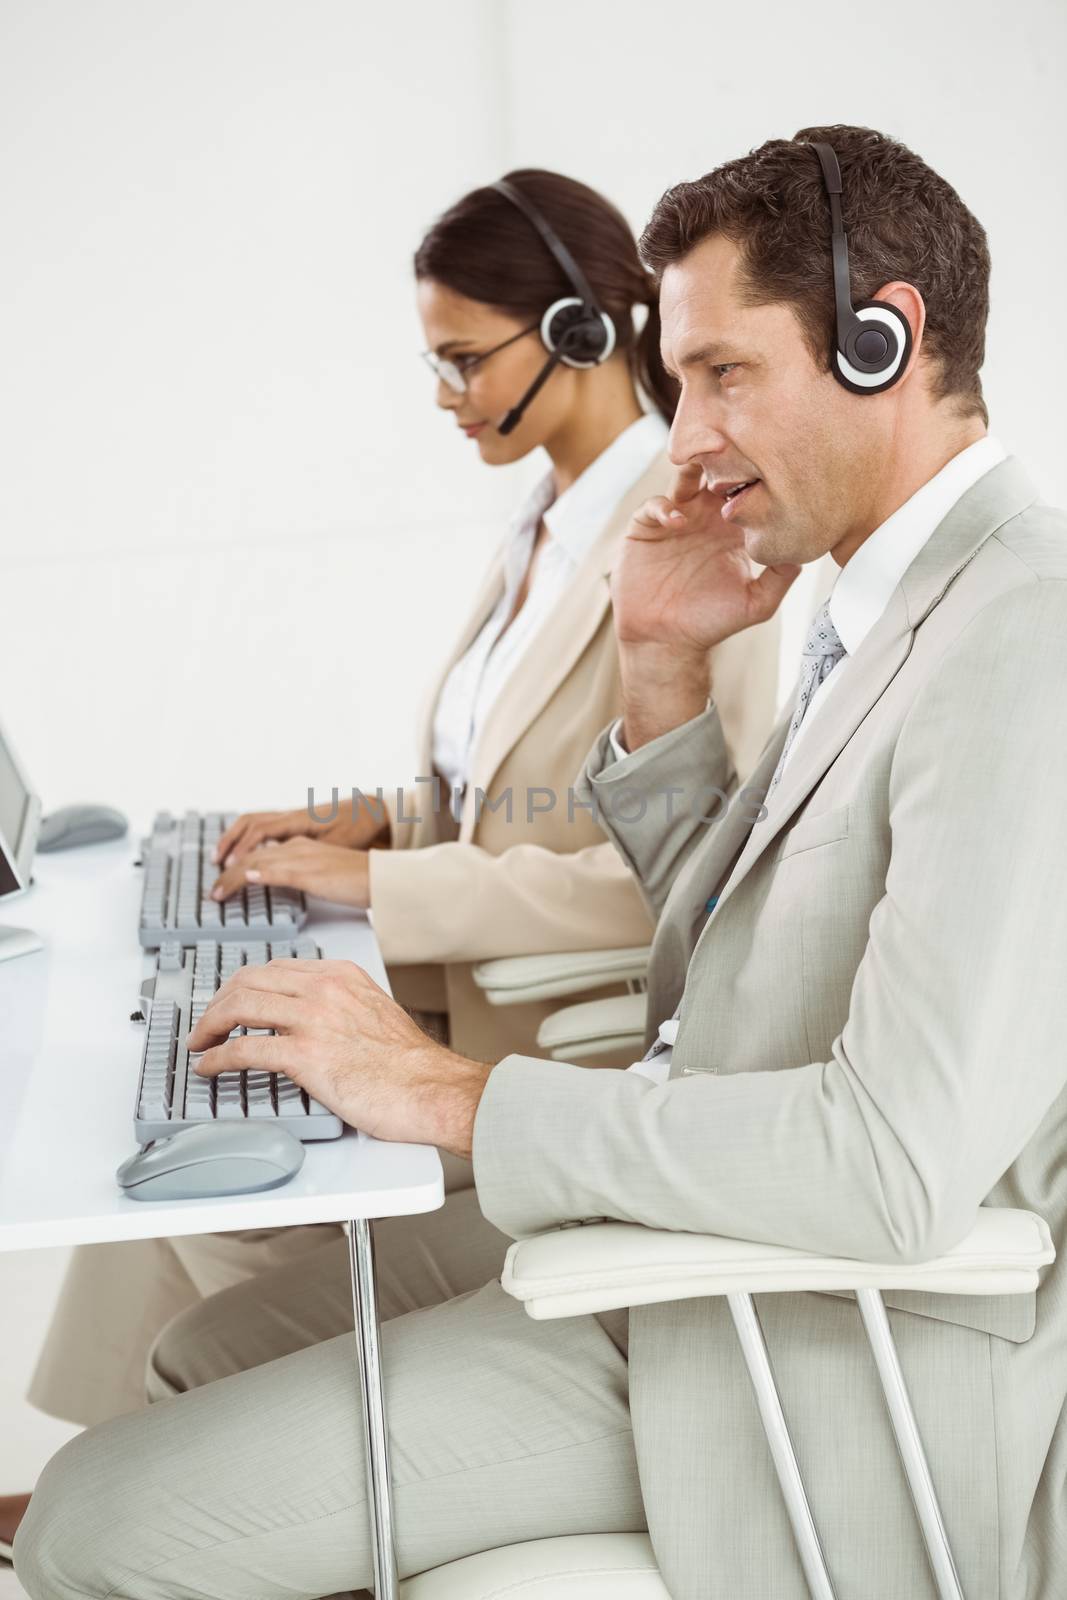 Business people with headsets using computers by Wavebreakmedia